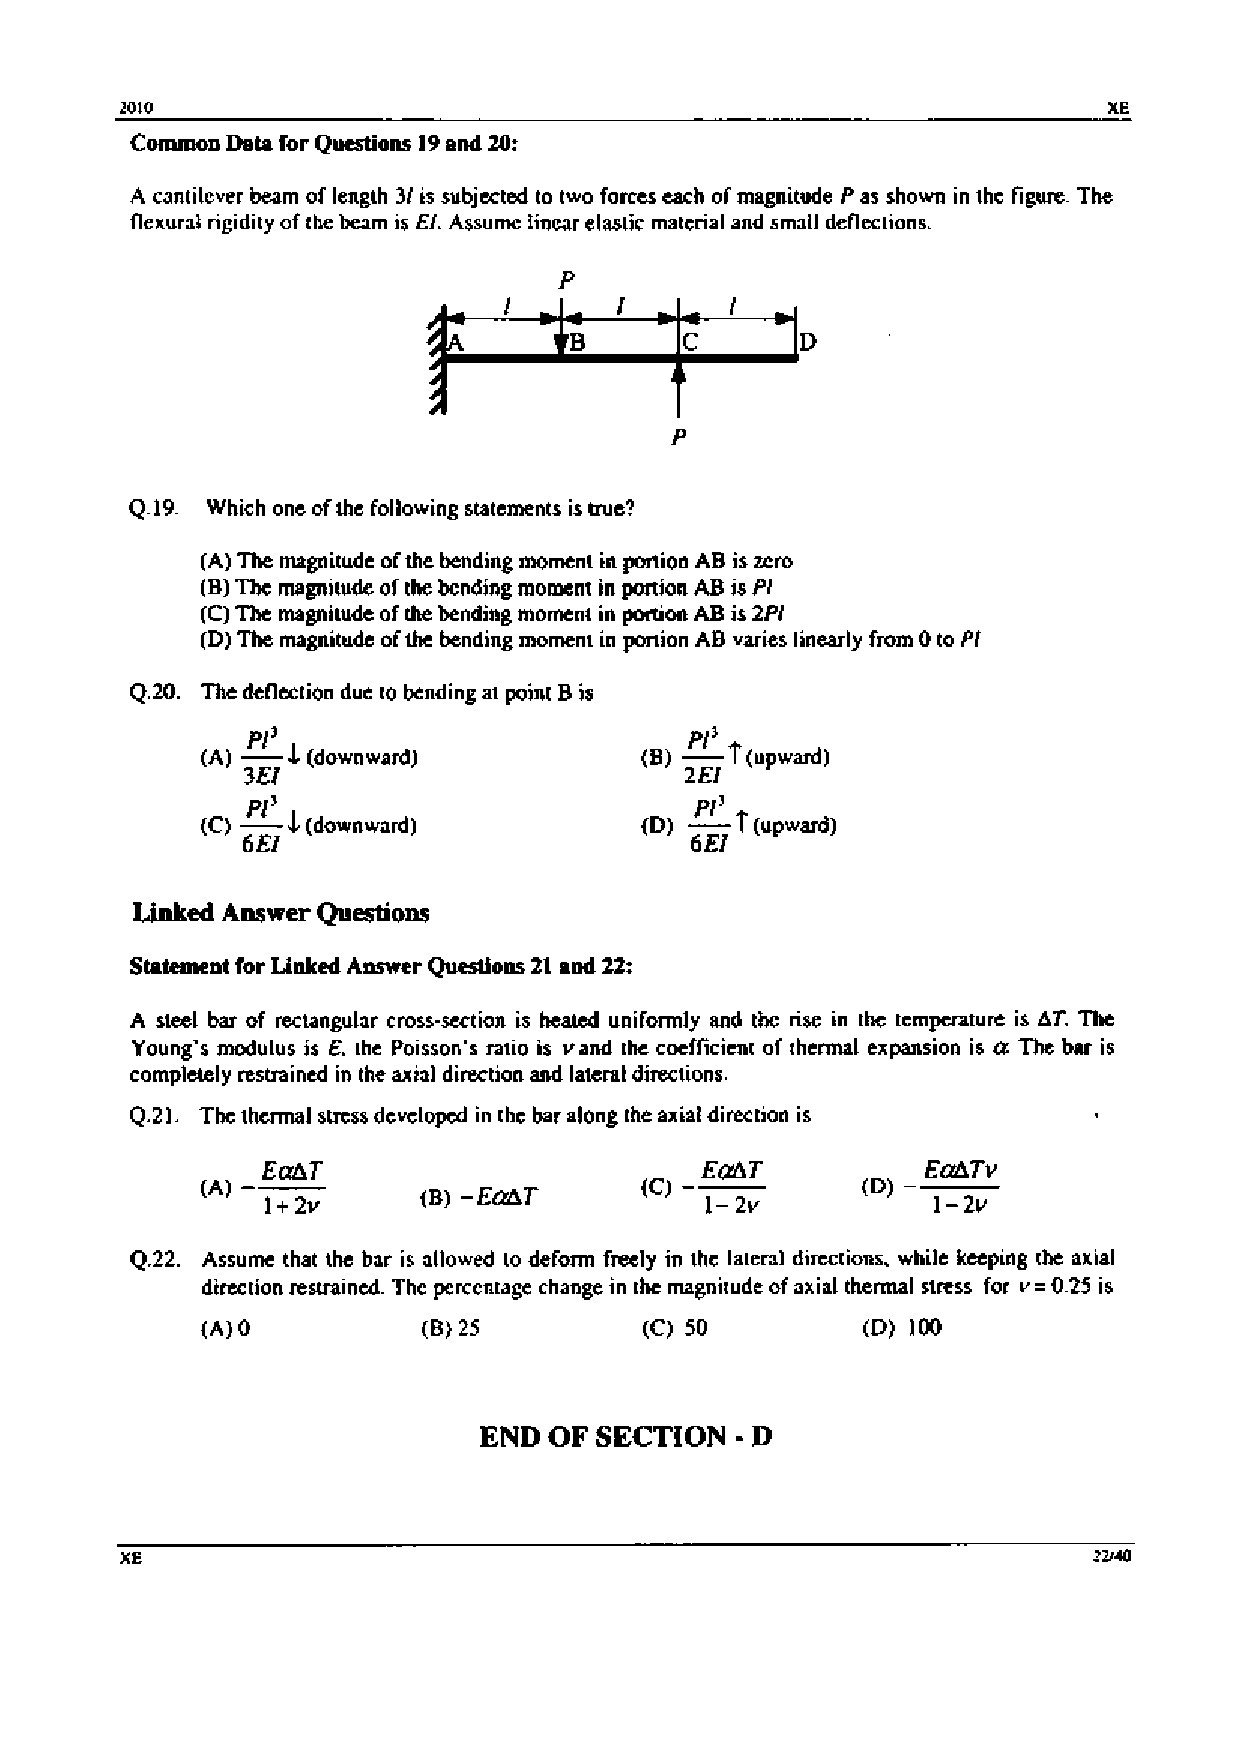 GATE Exam Question Paper 2010 Engineering Sciences 22